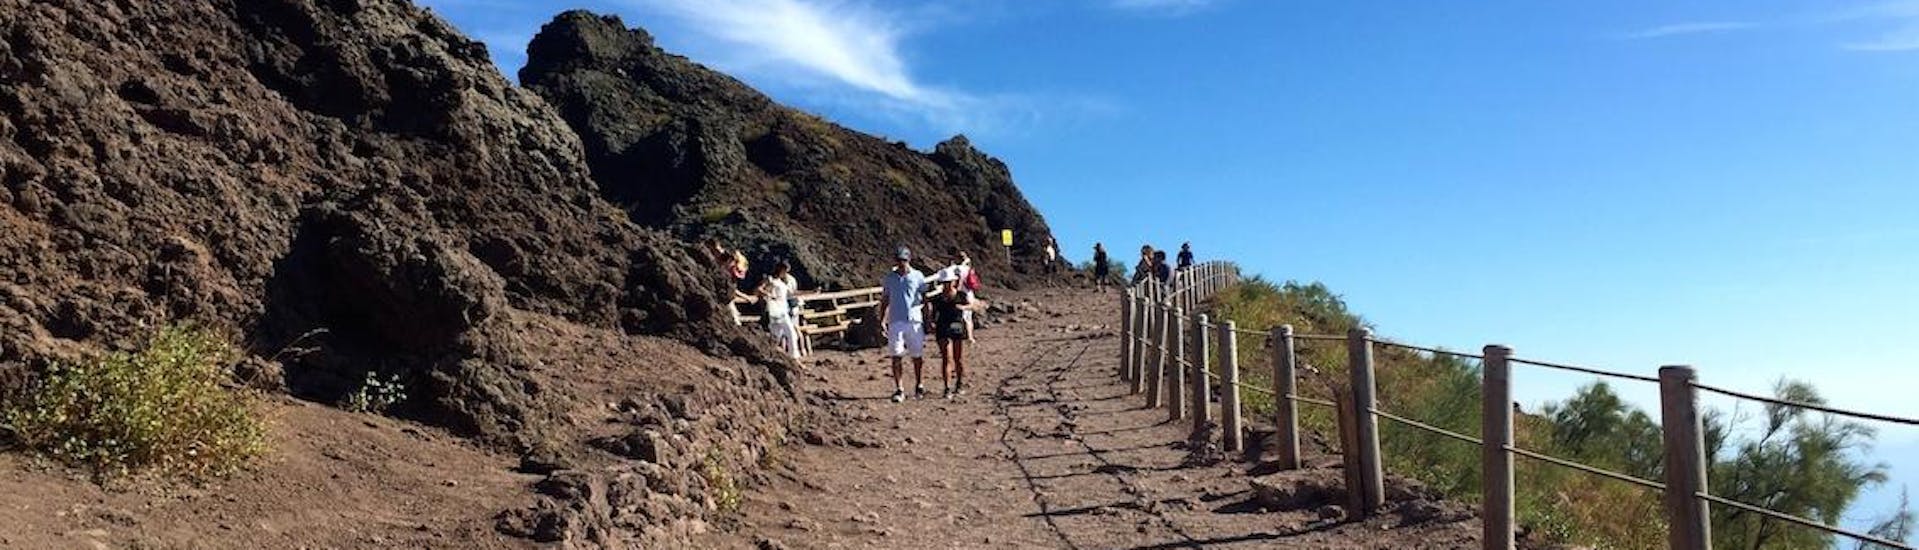 A hike on the Vesuvius is also one of the highlights of the Boat Trip from Sorrento to Pompeii and Vesuvius with Lunch.